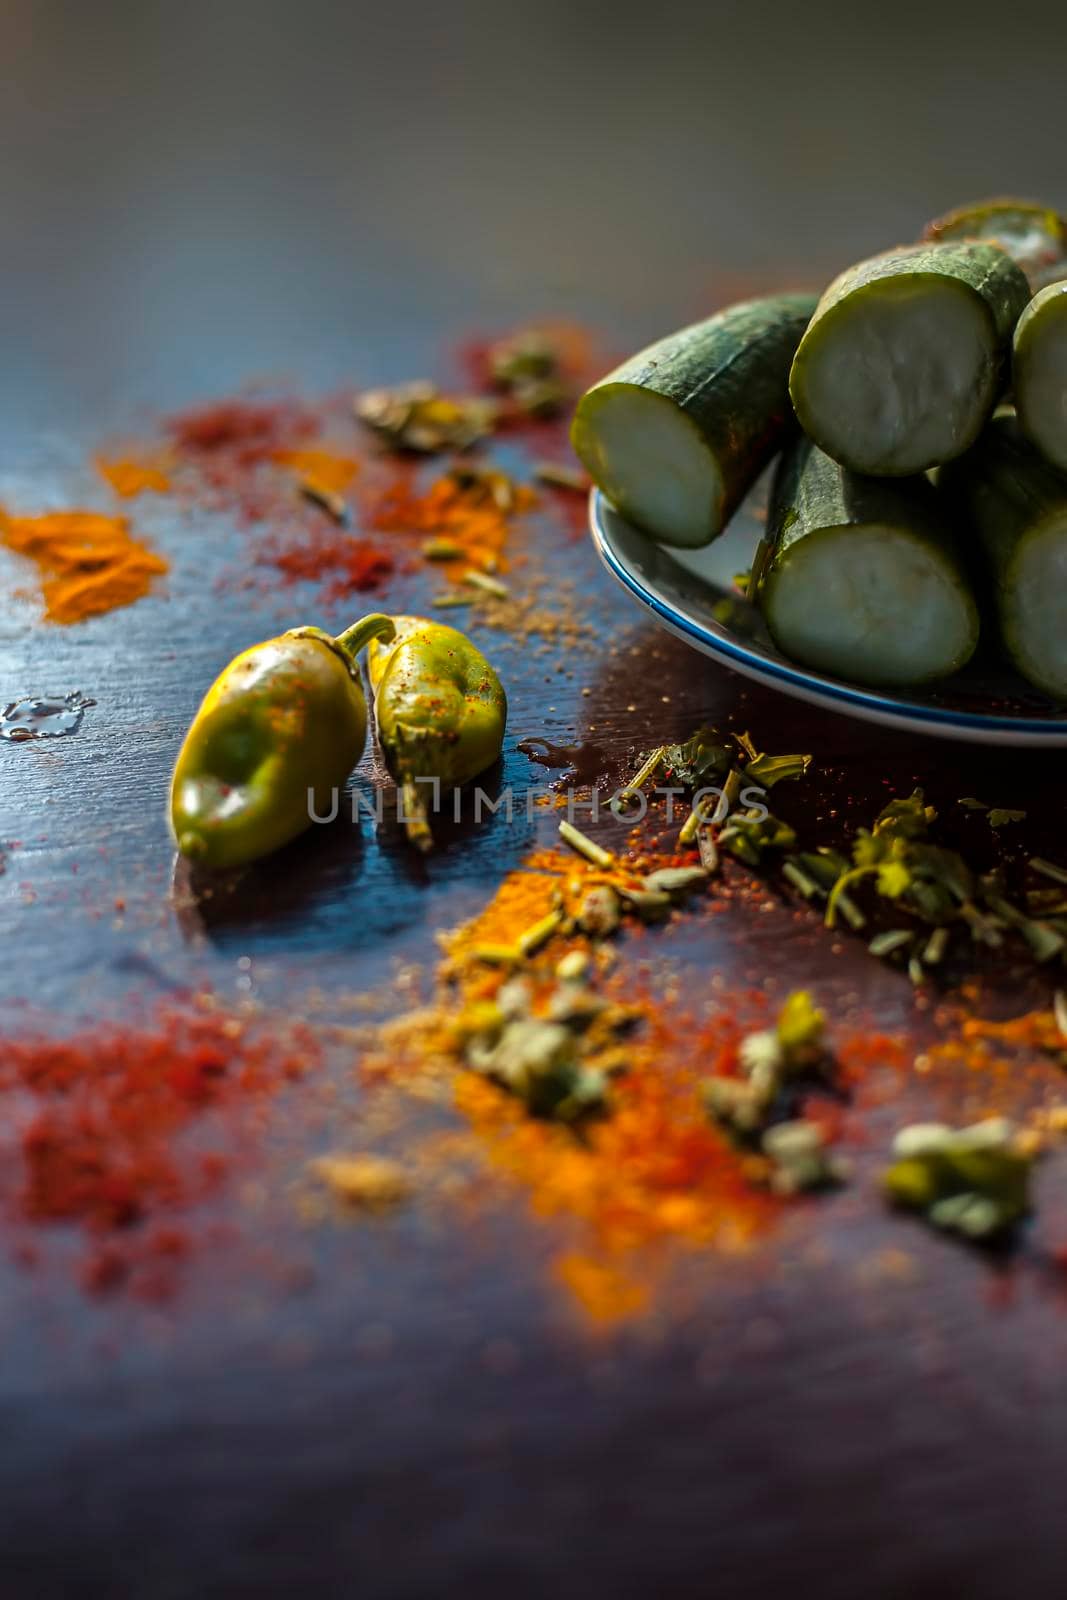 Close up shot of raw Galka or sponge gourd cut in a glass plate along with all the spices including Haldi, Mirchi,namak,garam masala, etc on a brown wooden table. Vertical high angle shot.